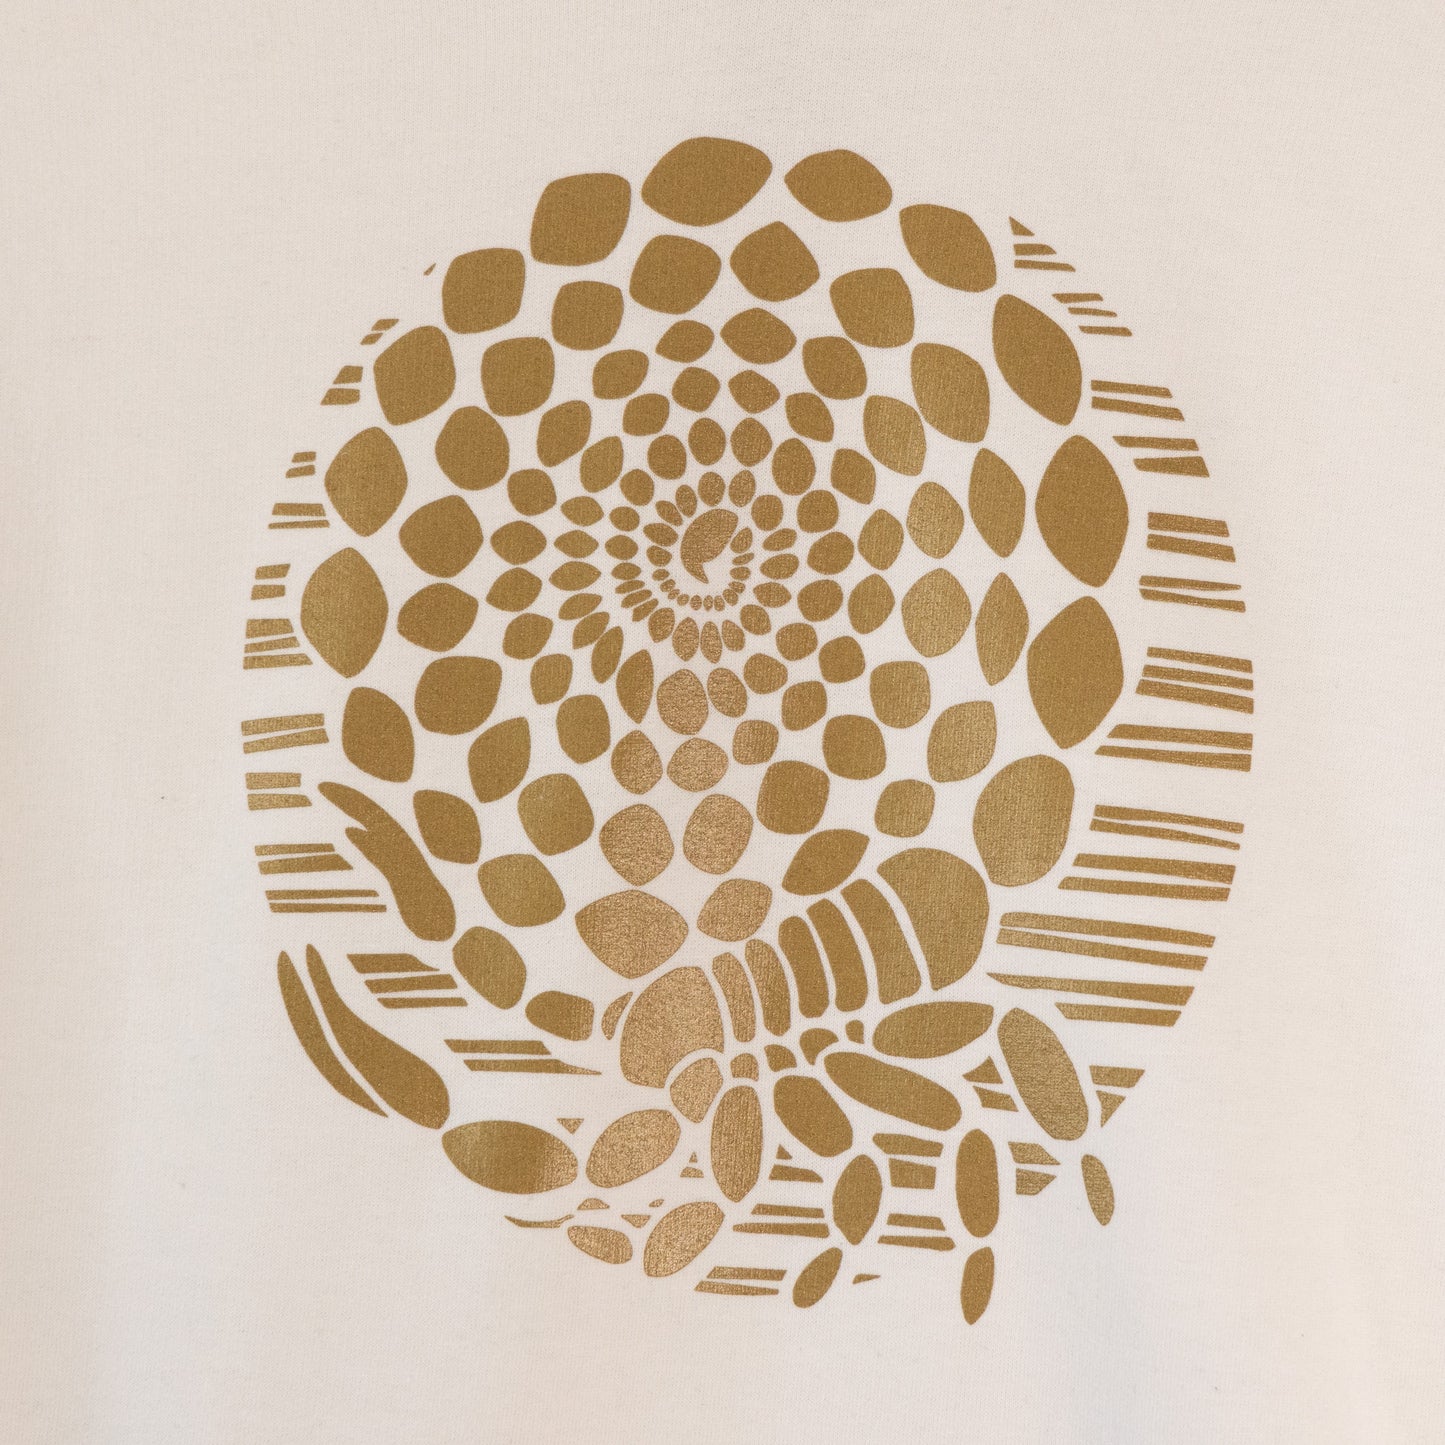 Close up of the design. A white hoodie sweatshirt with an illustrated design of a metallic gold scorpion with its tail coiled into a spiral.